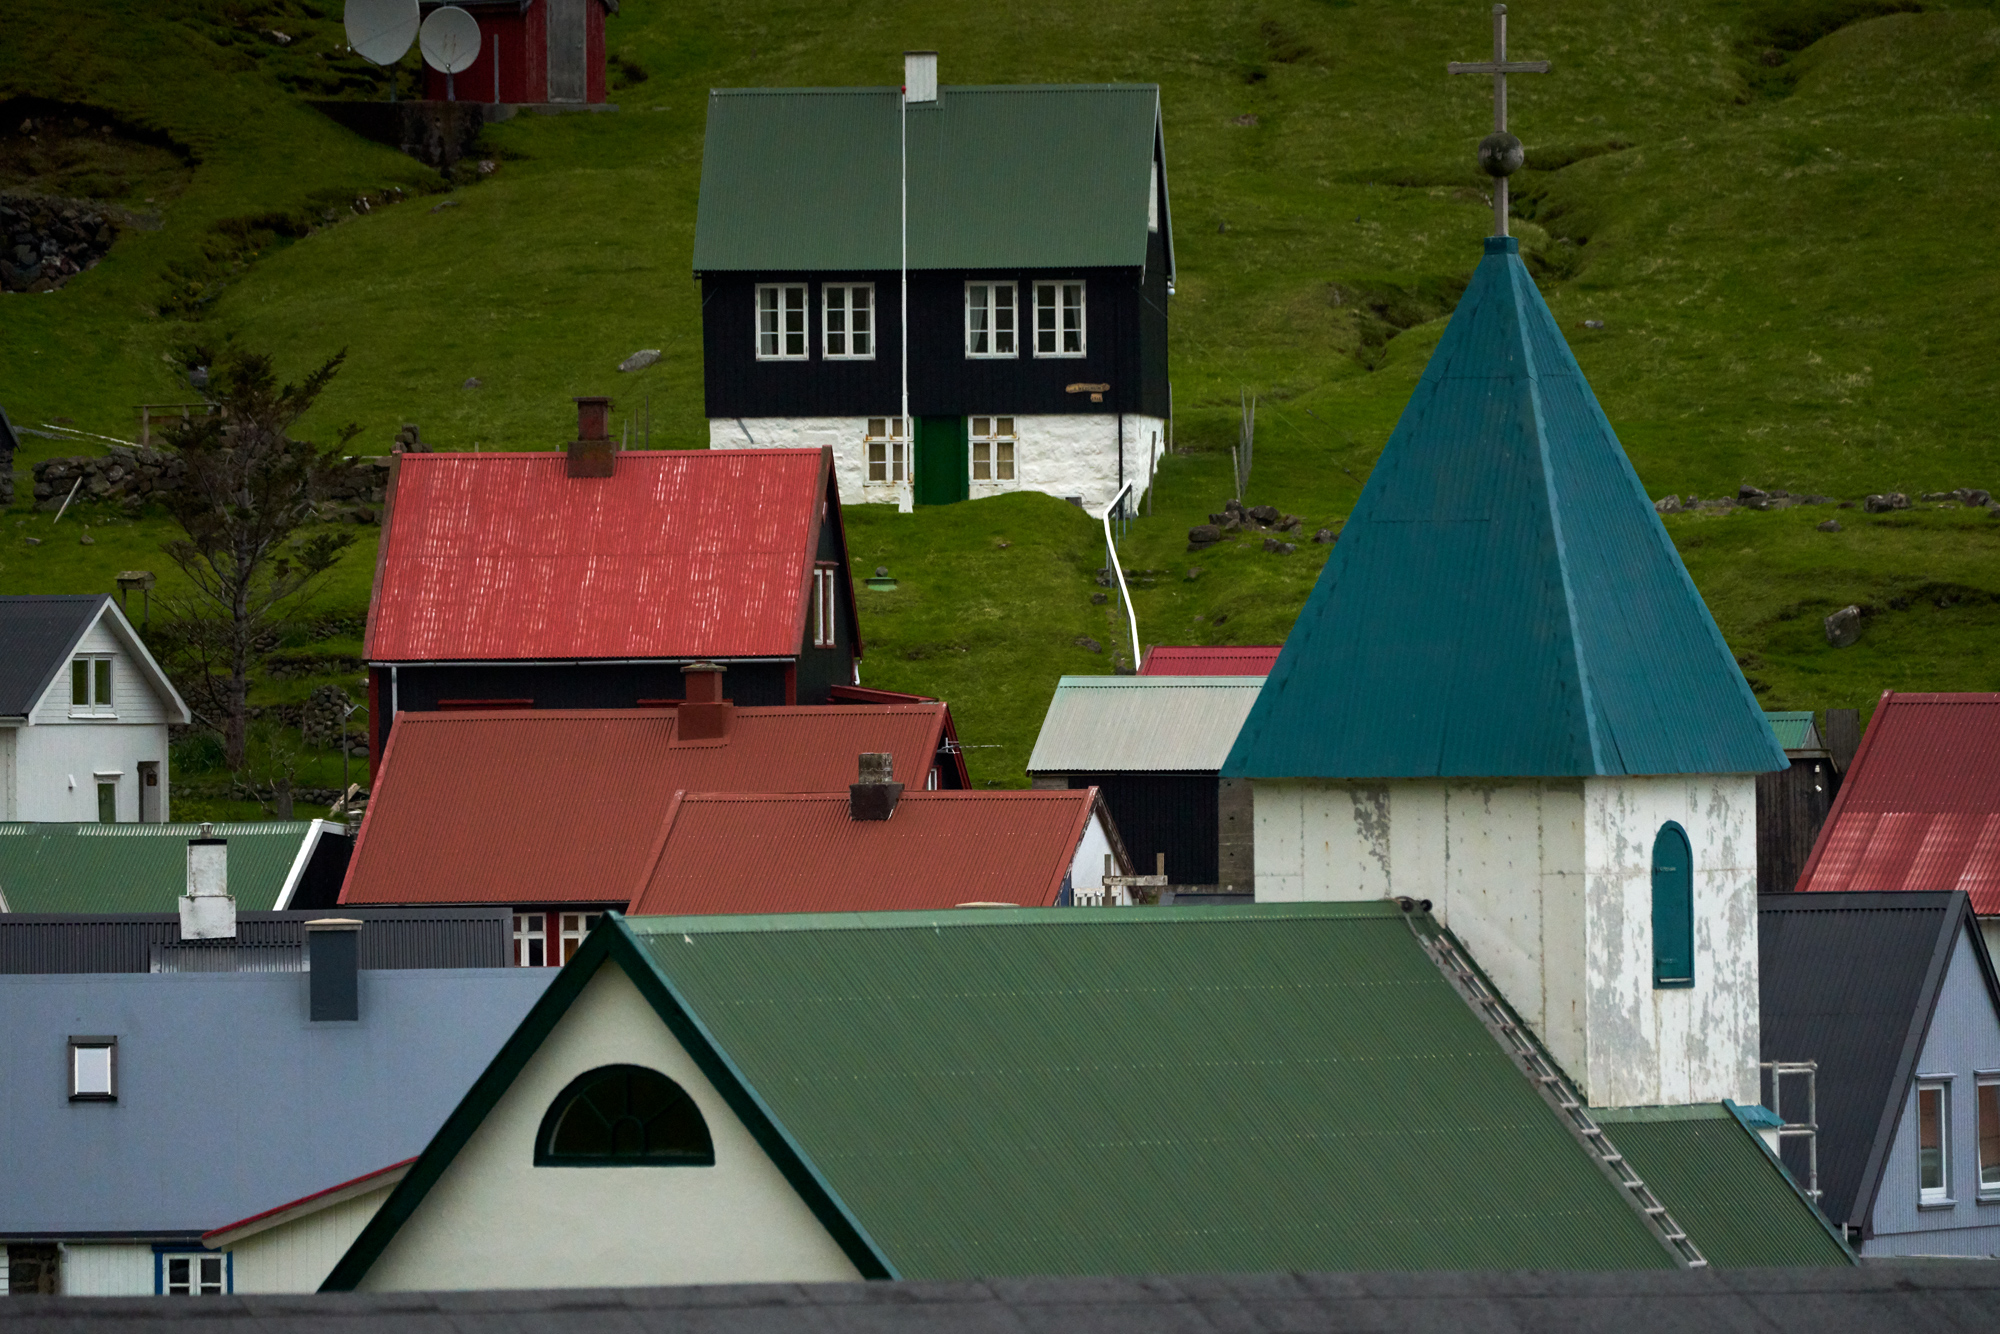 A 100-400mm lens allows you to choose perspective and interesting angles of roof tops